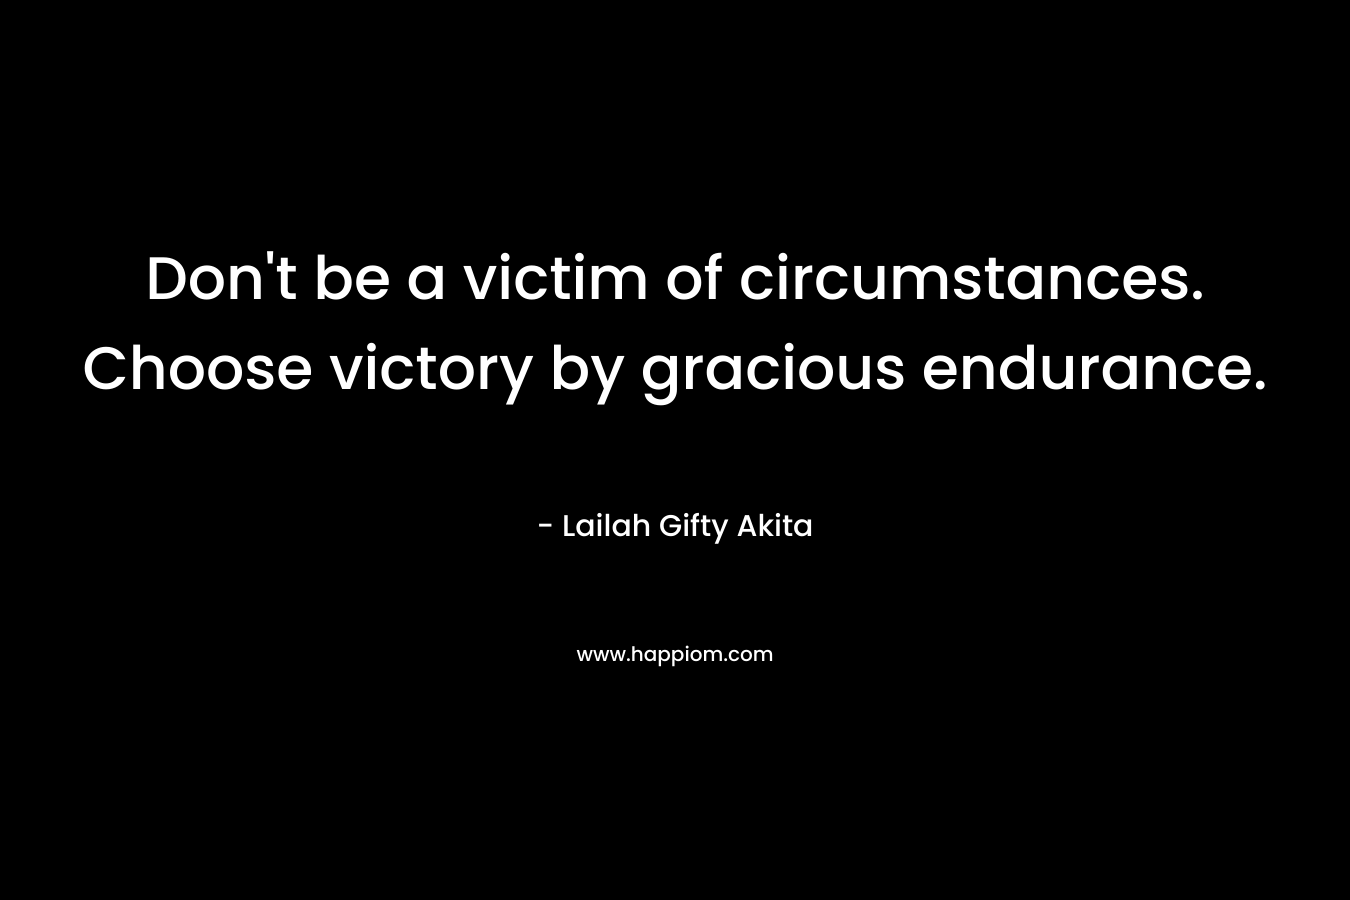 Don't be a victim of circumstances. Choose victory by gracious endurance.